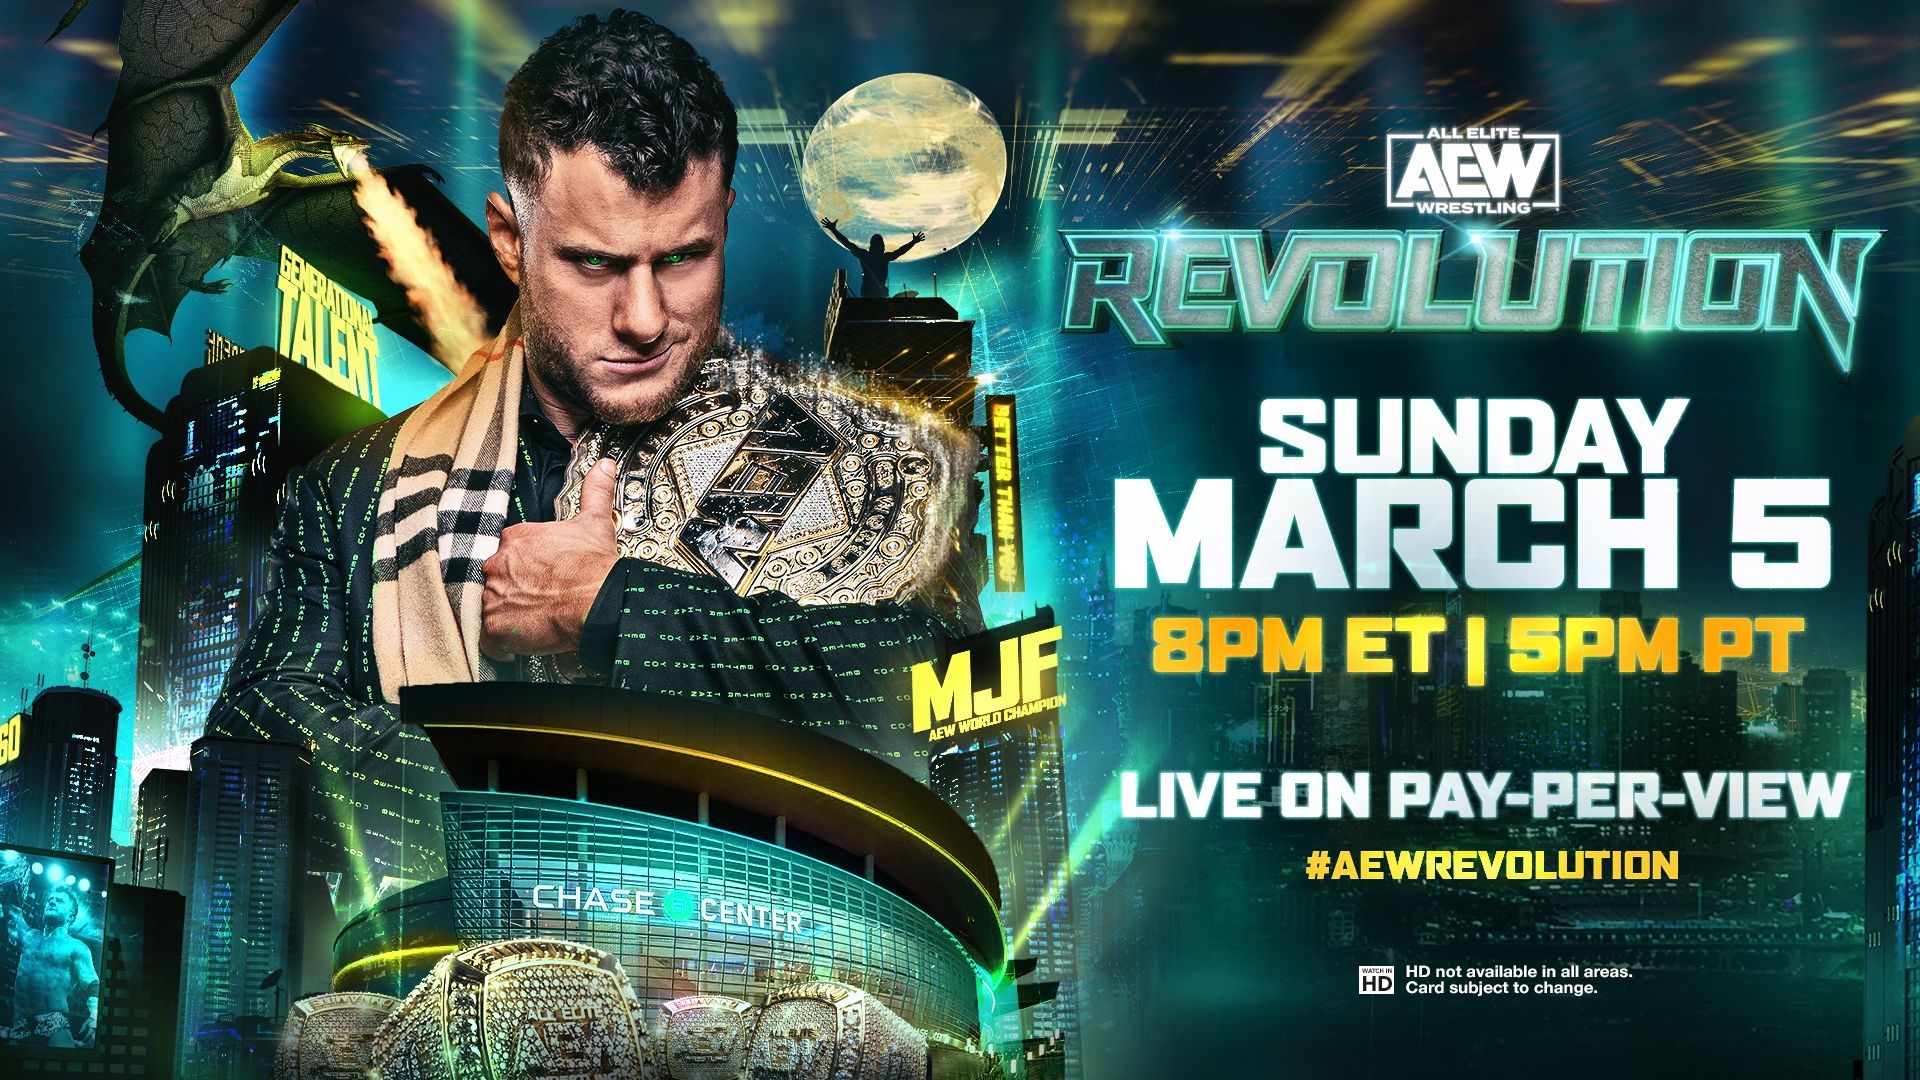 AEW Revolution, featuring MJF versus Bryan Danielson in a 60-minute Iron Man match, live on Pay-Per-View with Spectrum TV.